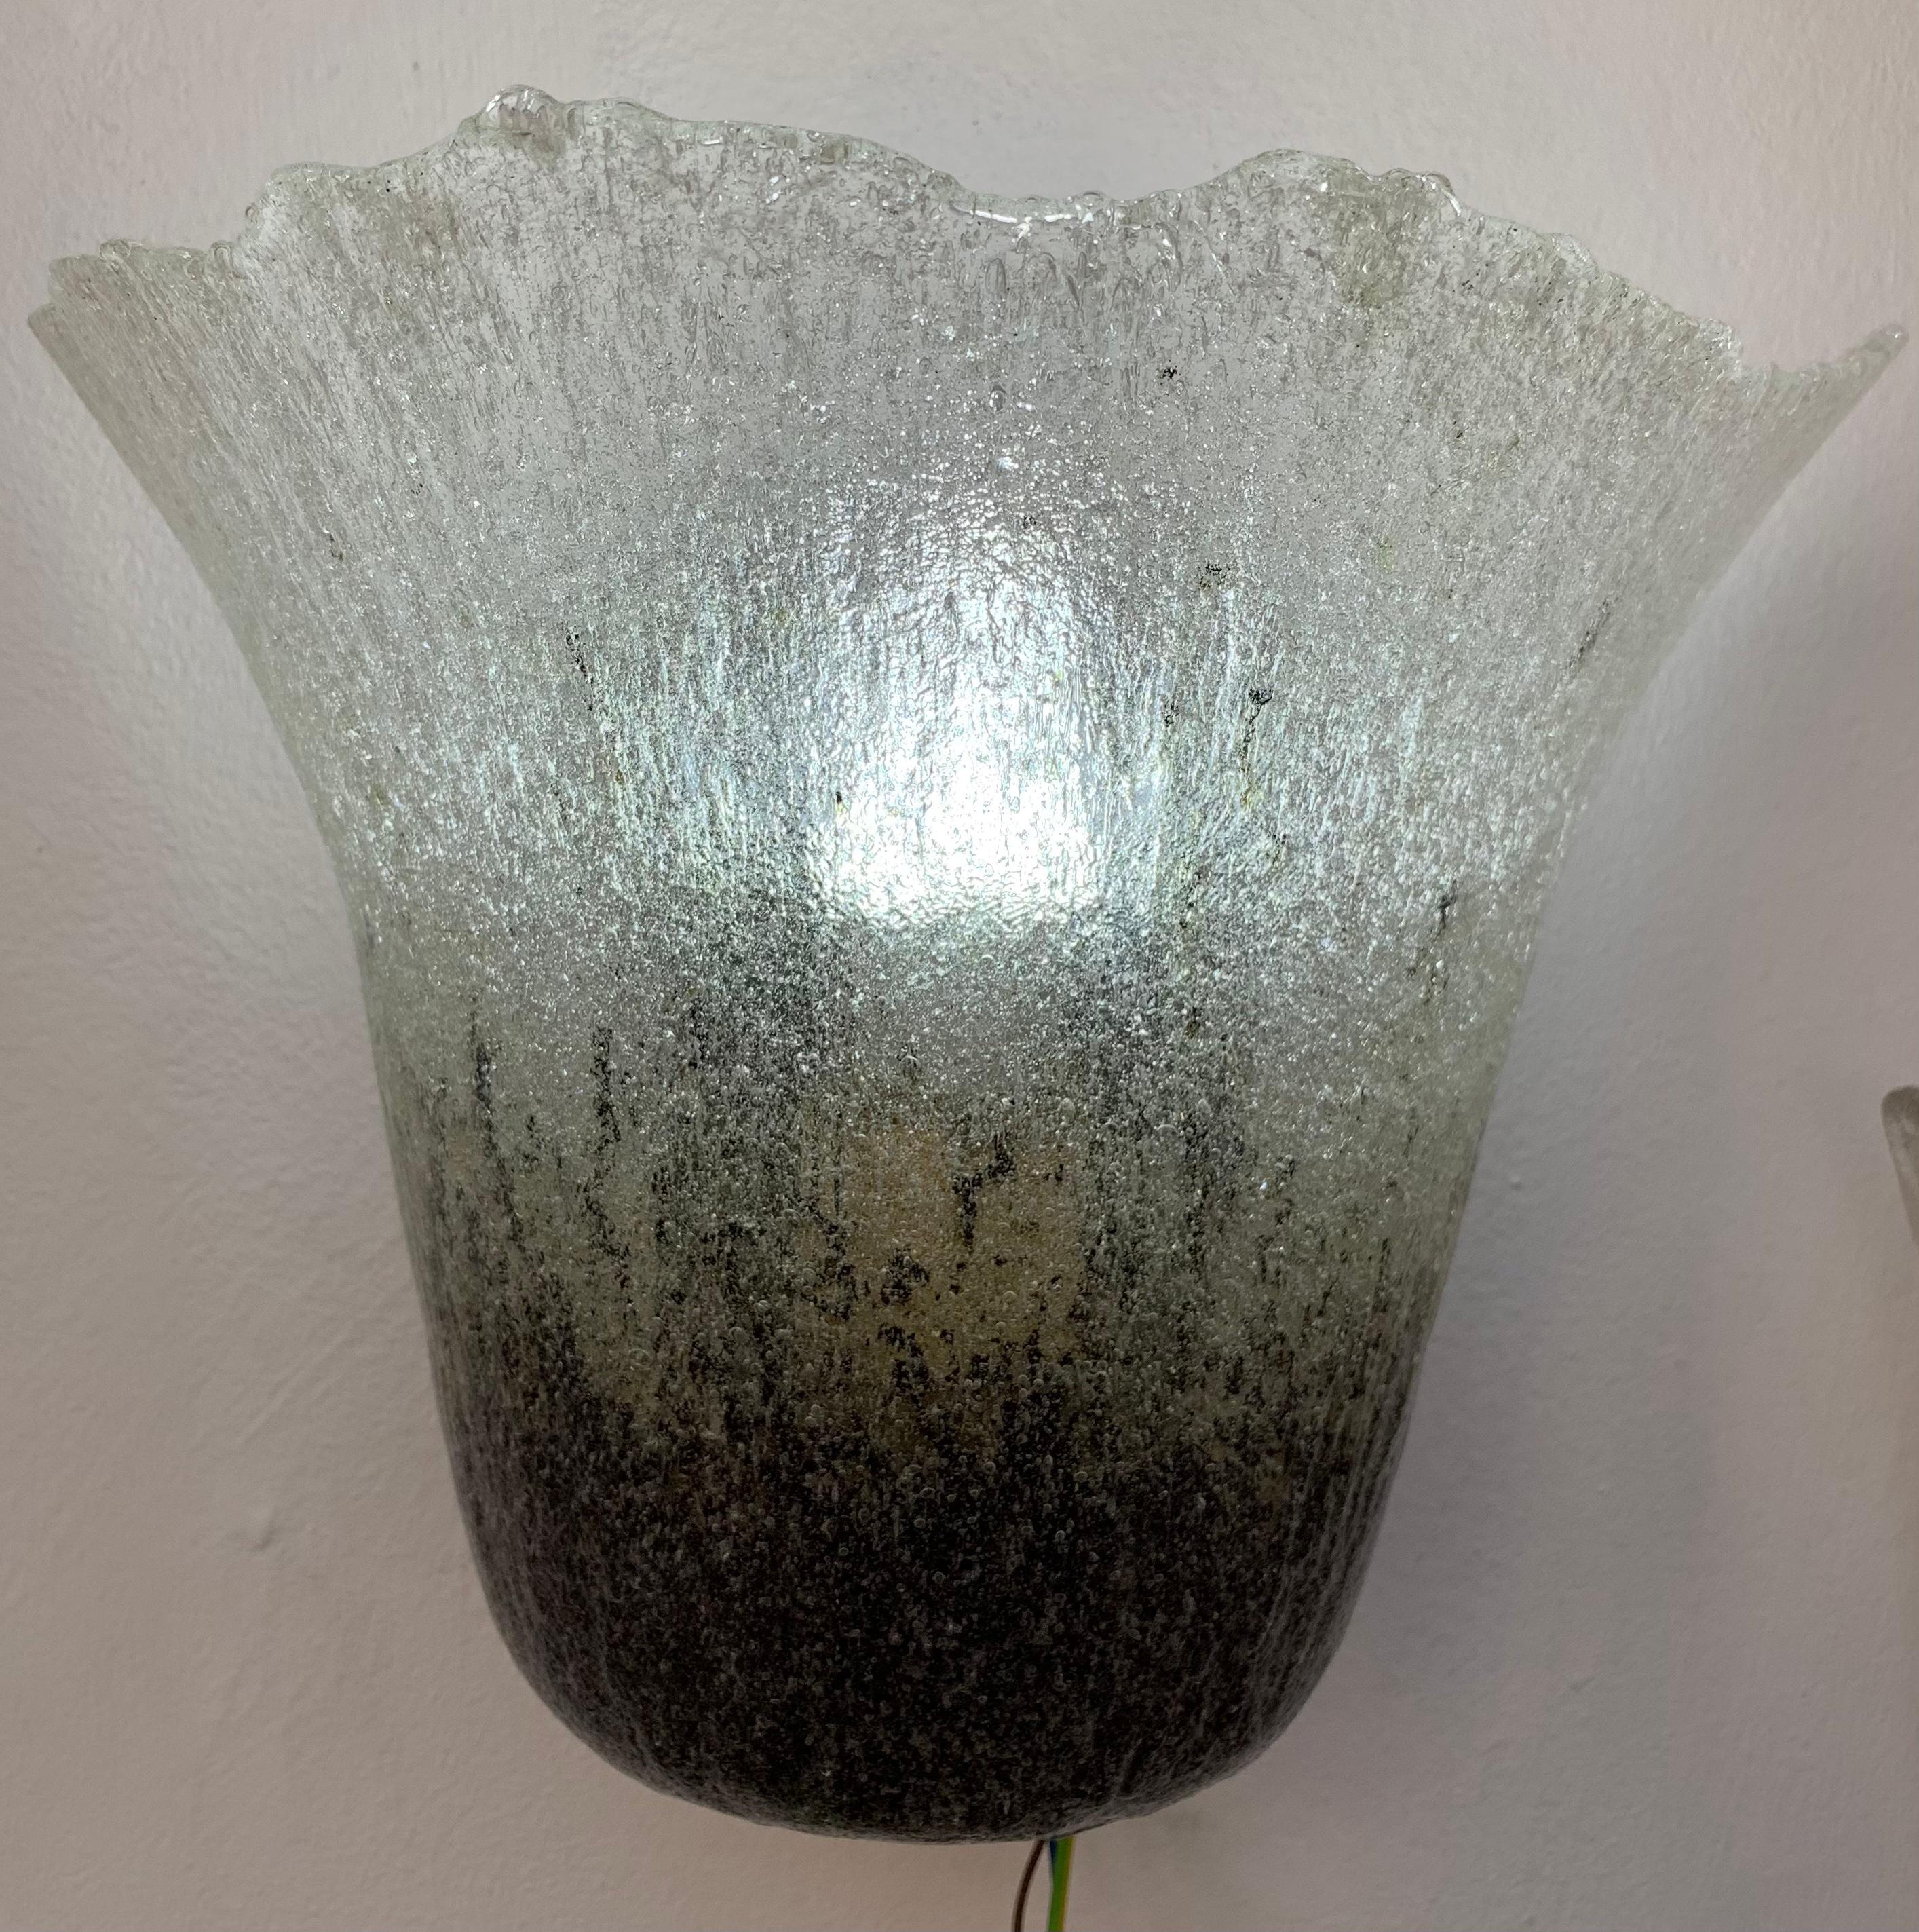 A single 1970s German wall sconce manufactured by Peill and Putzler. The thick Murano glass shade is secured onto the gold tinted metal frame with a lacquered black metal fitting which it slots into and is secured in place with a feature brass screw